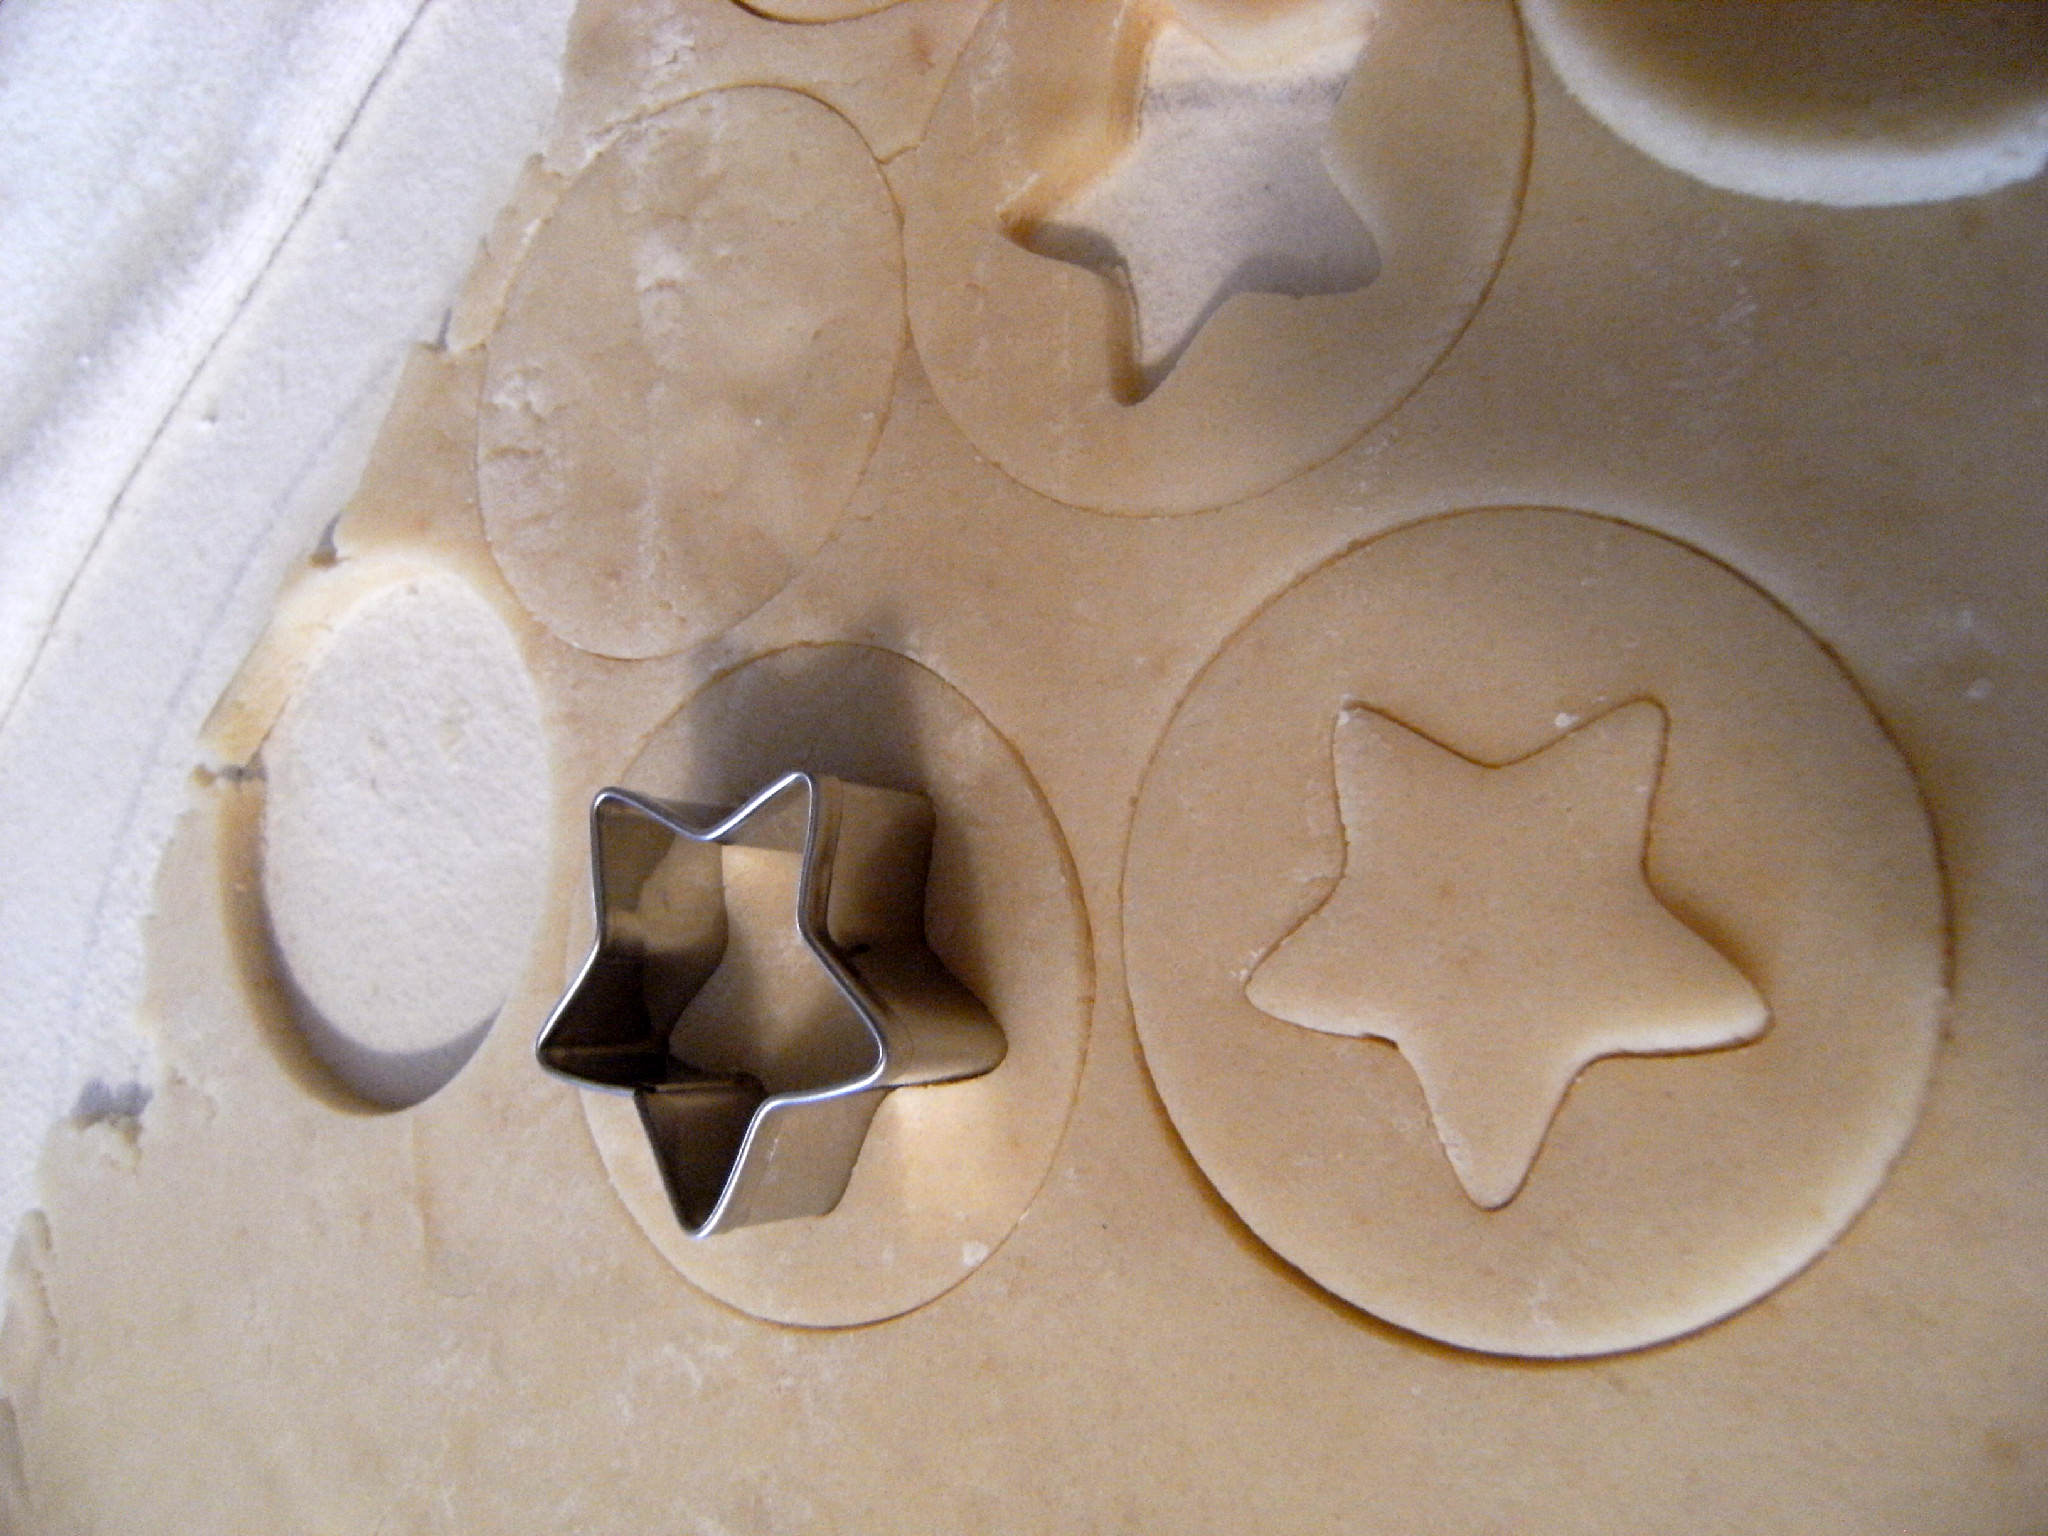 Shortbread Linzer Cookies being cut out